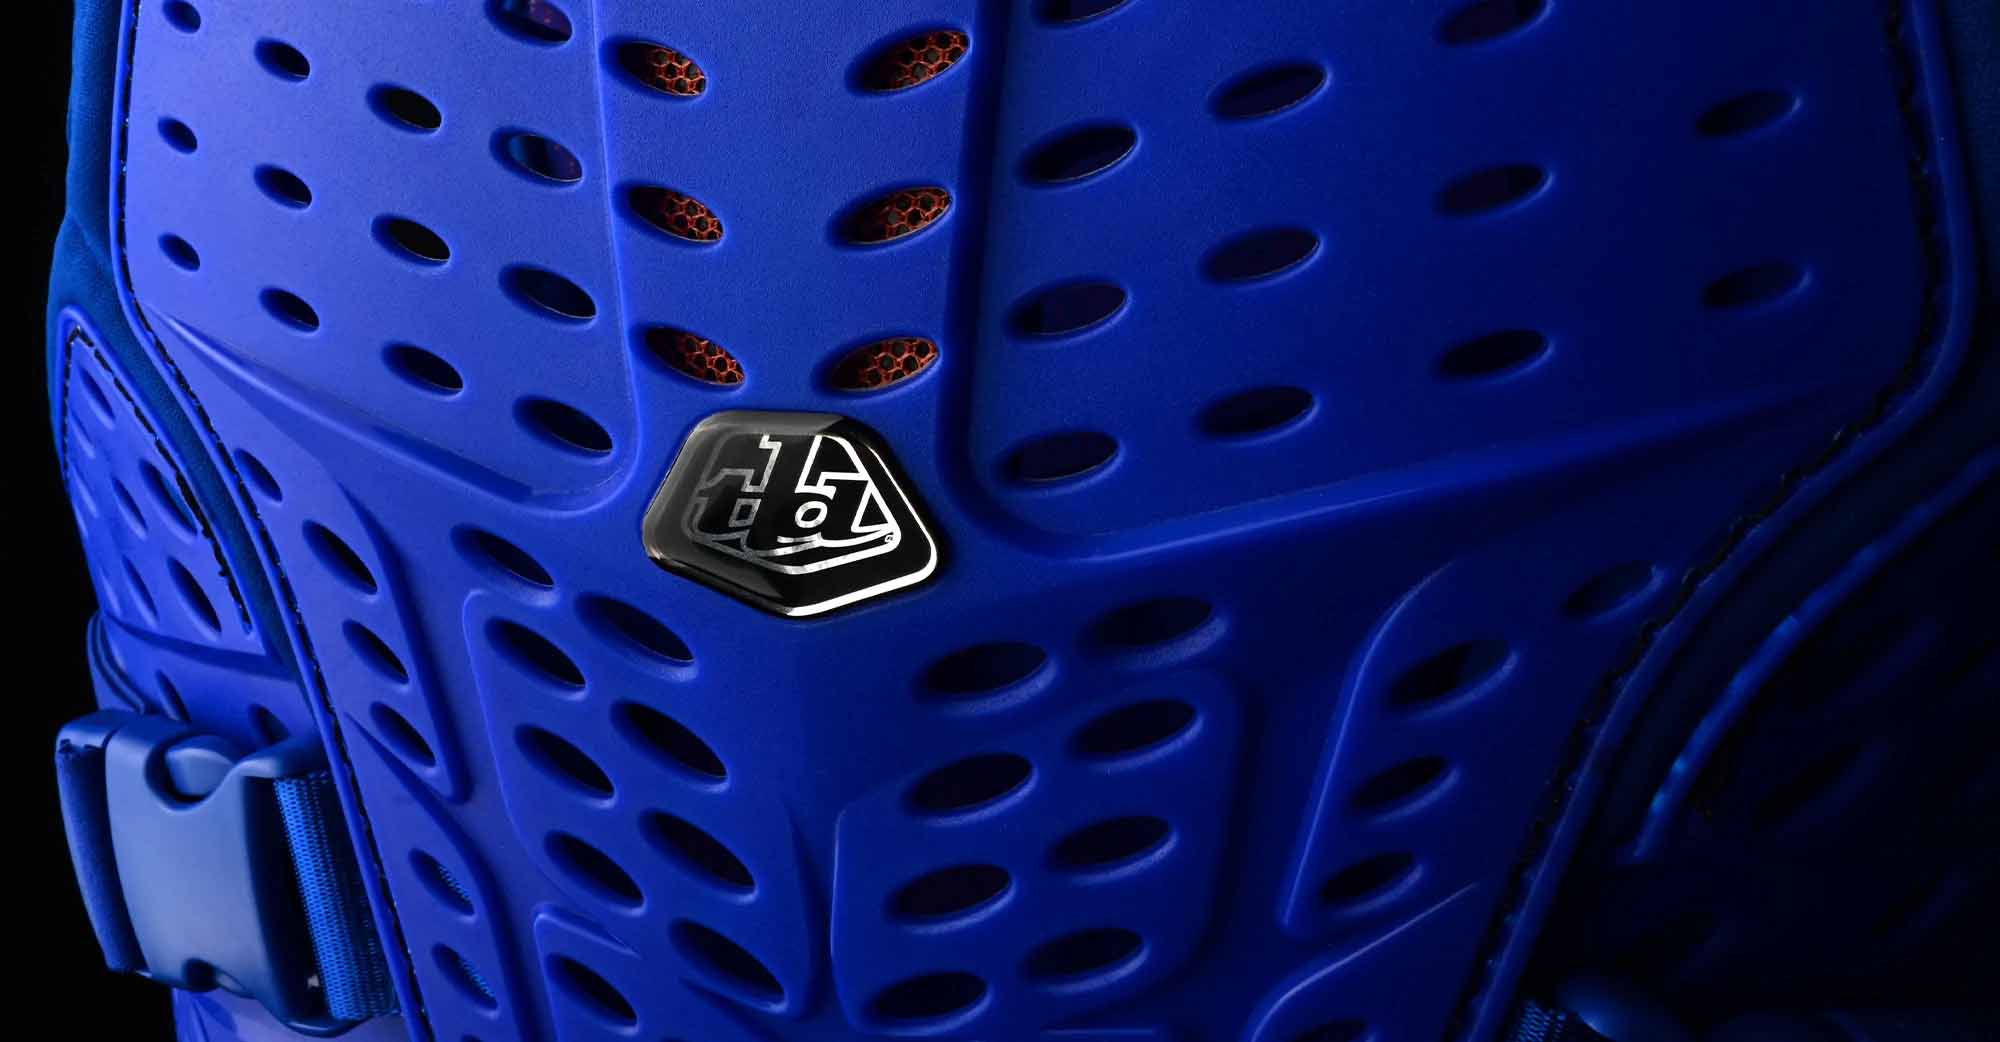 TLD - Rockfight chest protection closeup of blue tld logo